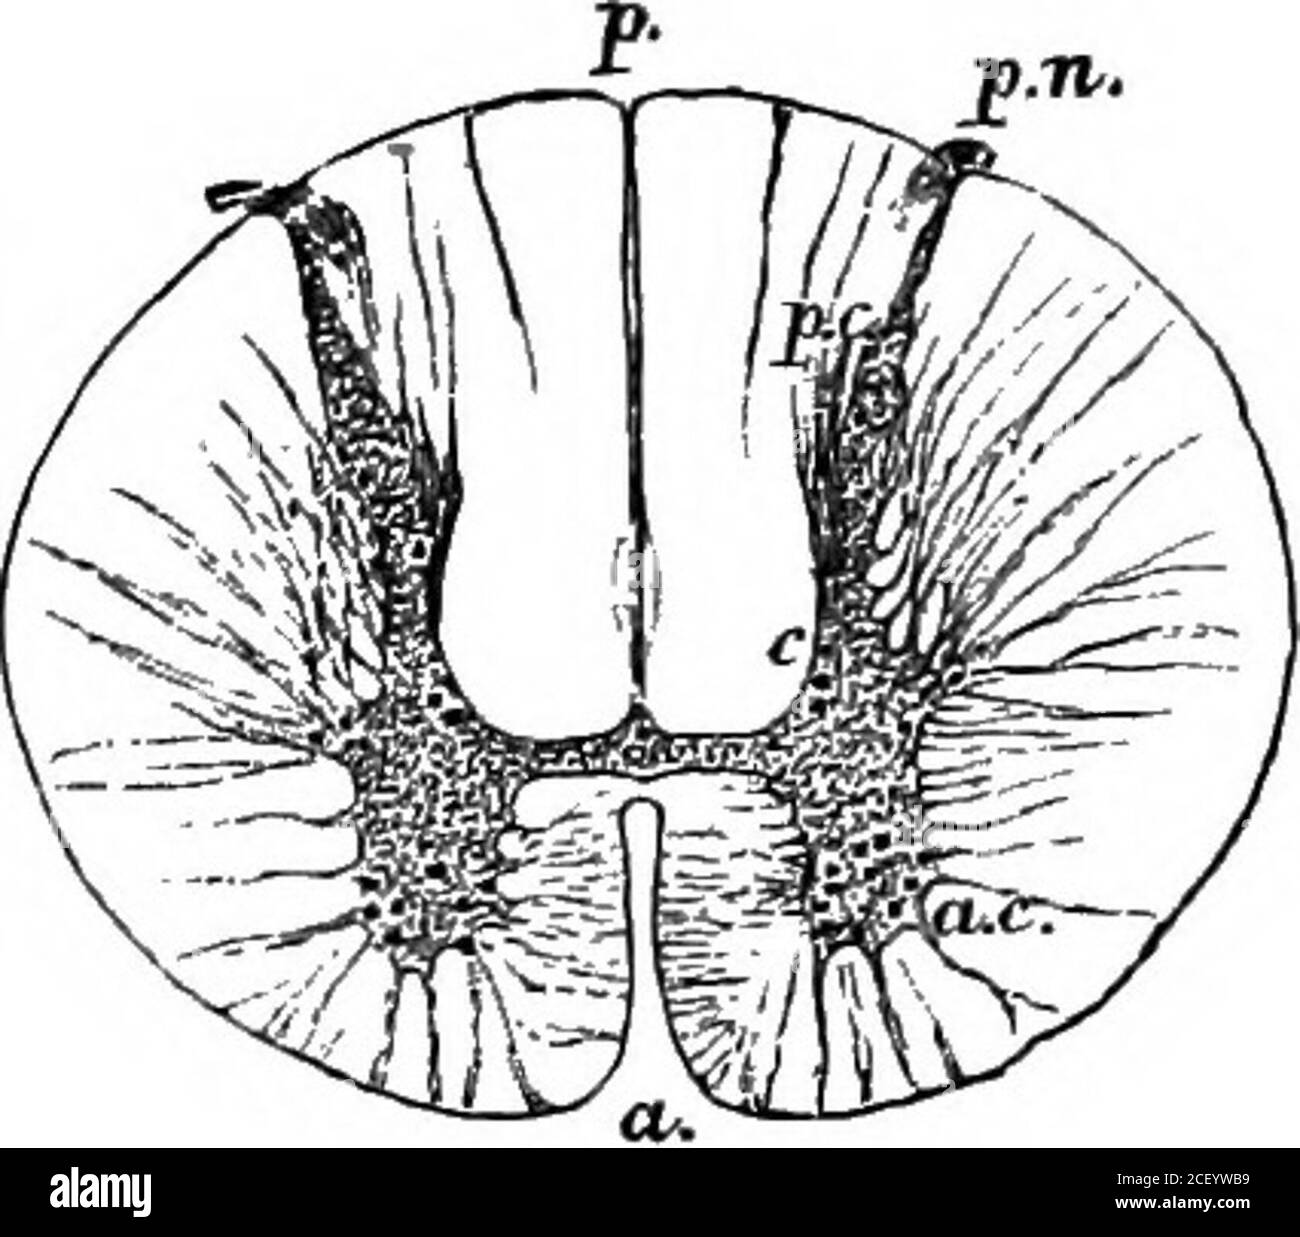 . Human physiology. re given off from the spinal cord, right and left,throughout its whole length. These are termed the spinal nerves.In the cervical and dorsal regions they emerge in pairs, passingout on each side through openings between the vertebras. Thereare thirty-one pairs of these nerves. At the lower end of the cordthe spinal nerves come off crowded together in the form of aparallel bundle which is called the cauda equina (Lat. horse tail),from its fancied resemblance to the tail of a horse. The grey matter of the spinal cord projects backward andforward on each side, forming the post Stock Photo